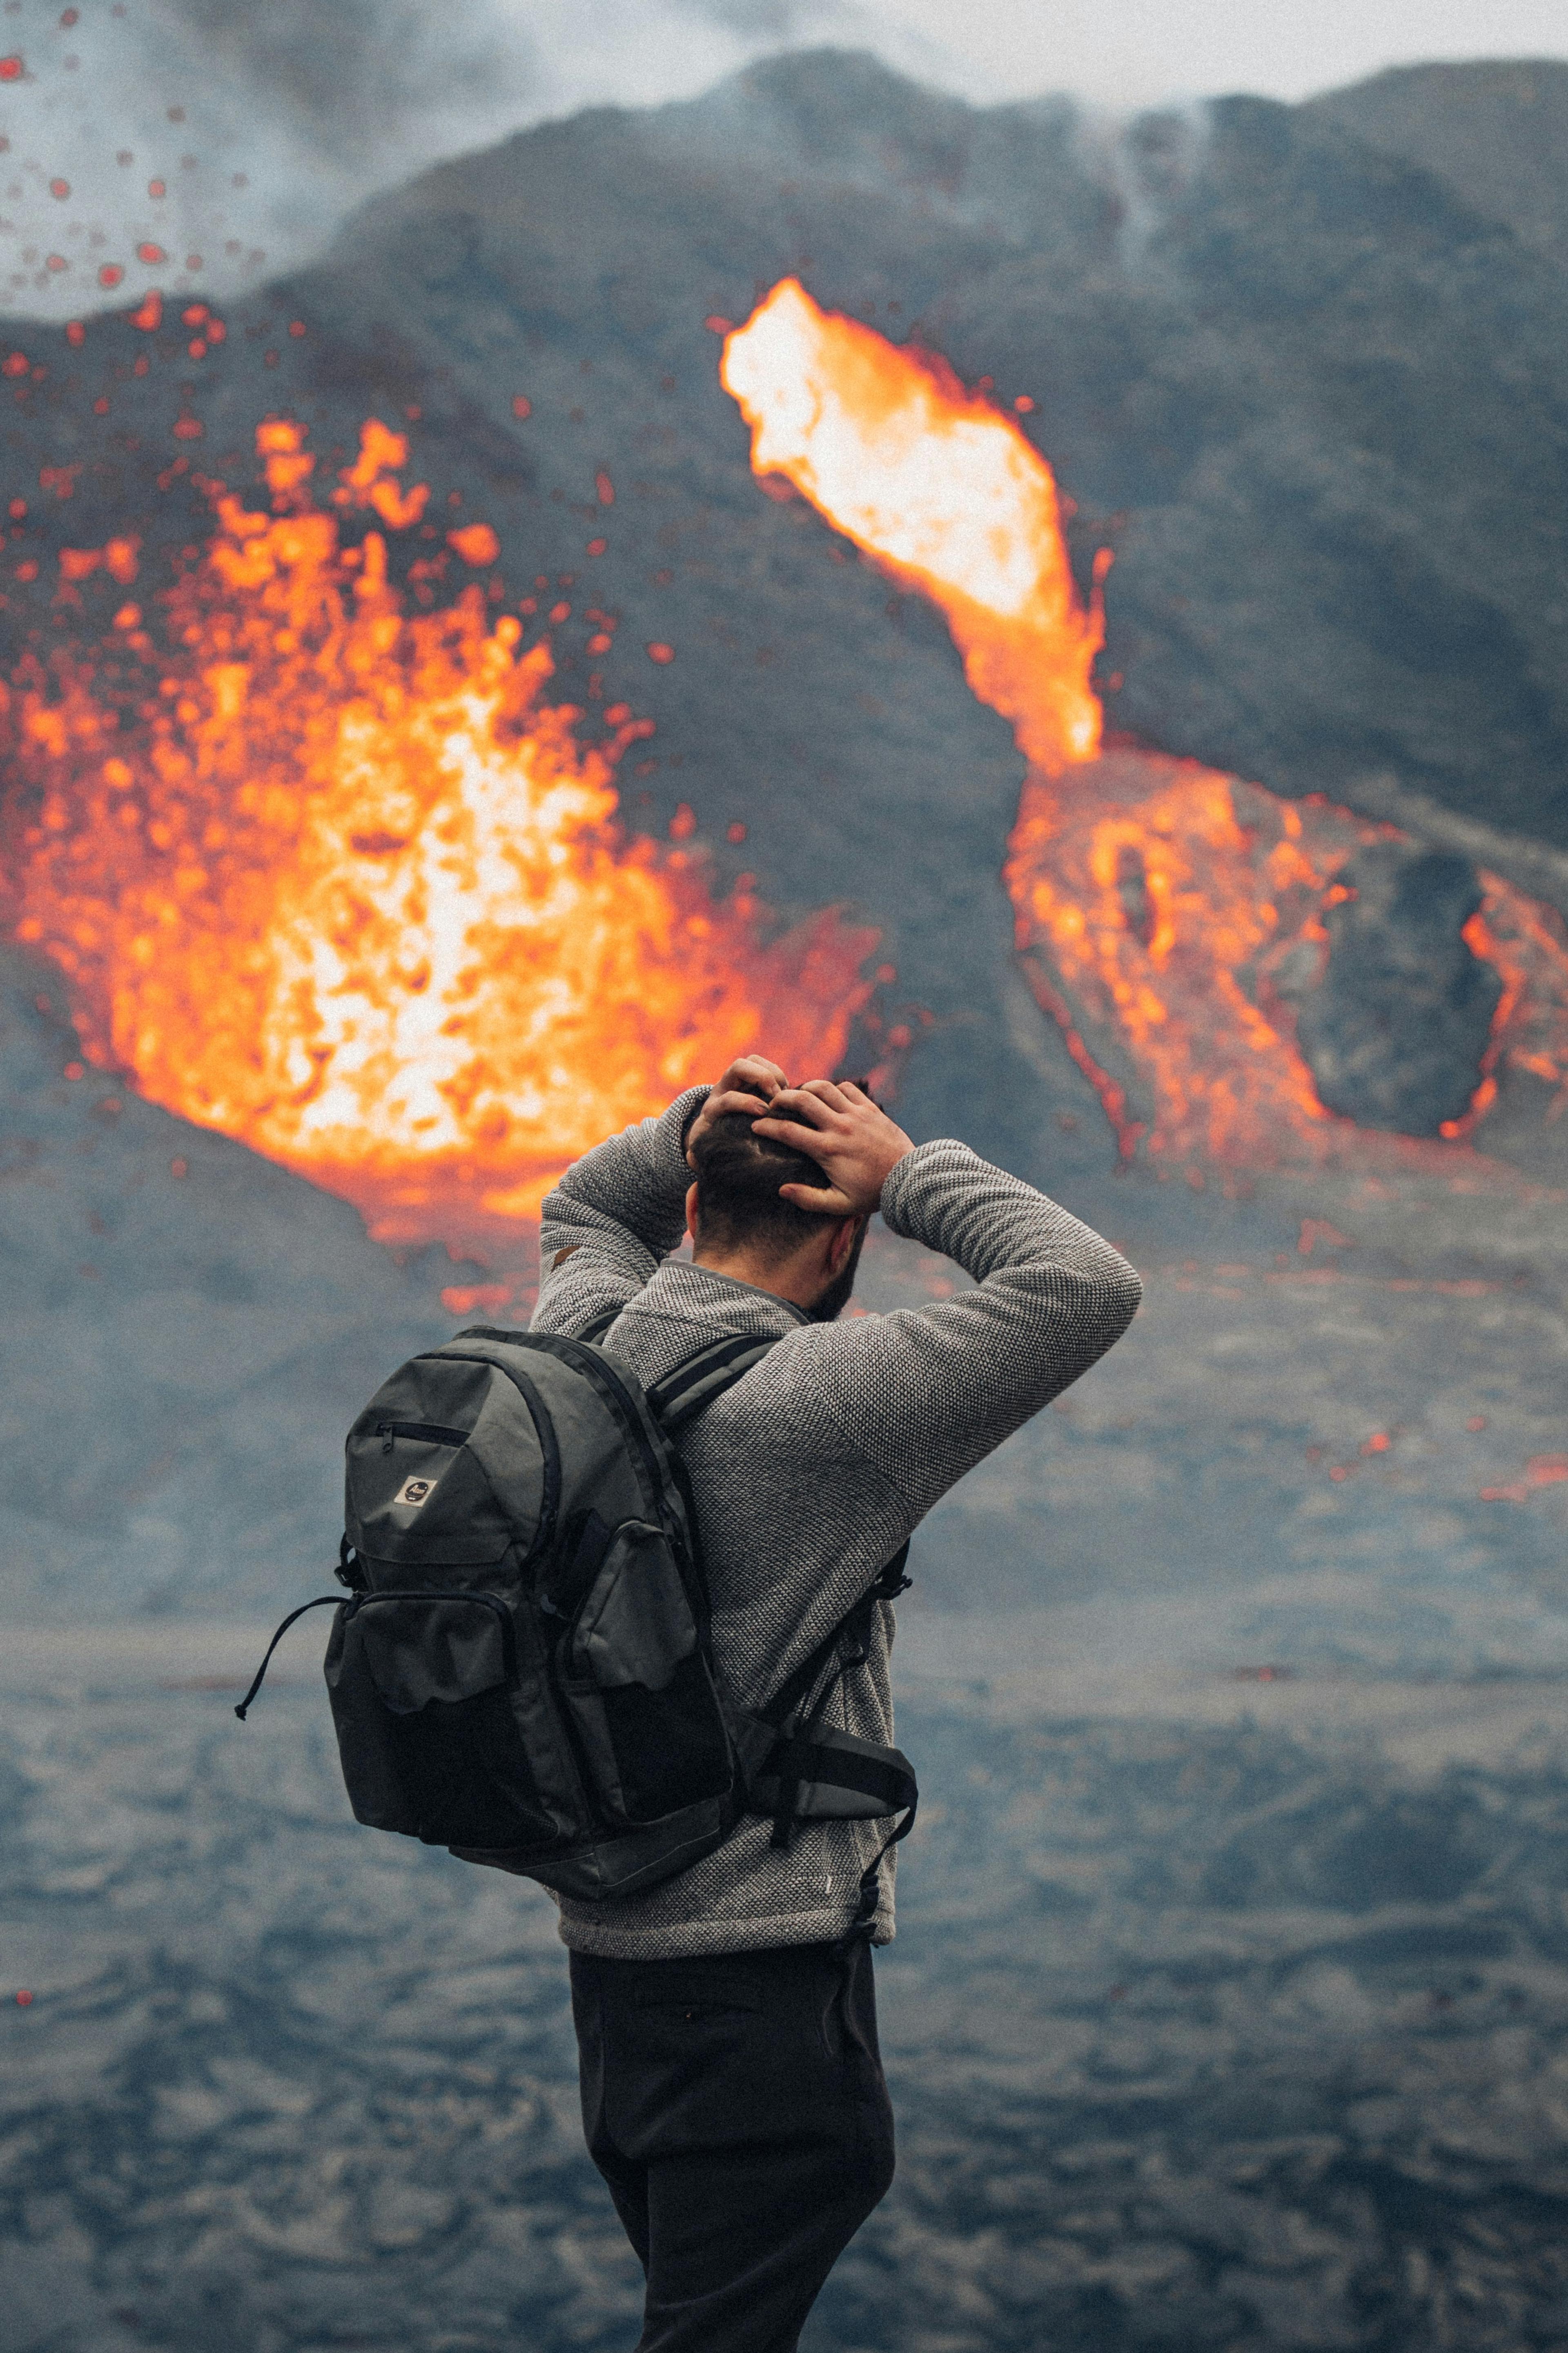 An awestruck spectator with a backpack grasps his head in disbelief at the intense and magnificent eruption before him, as Fagradalsfjall spews fiery lava high into the air.